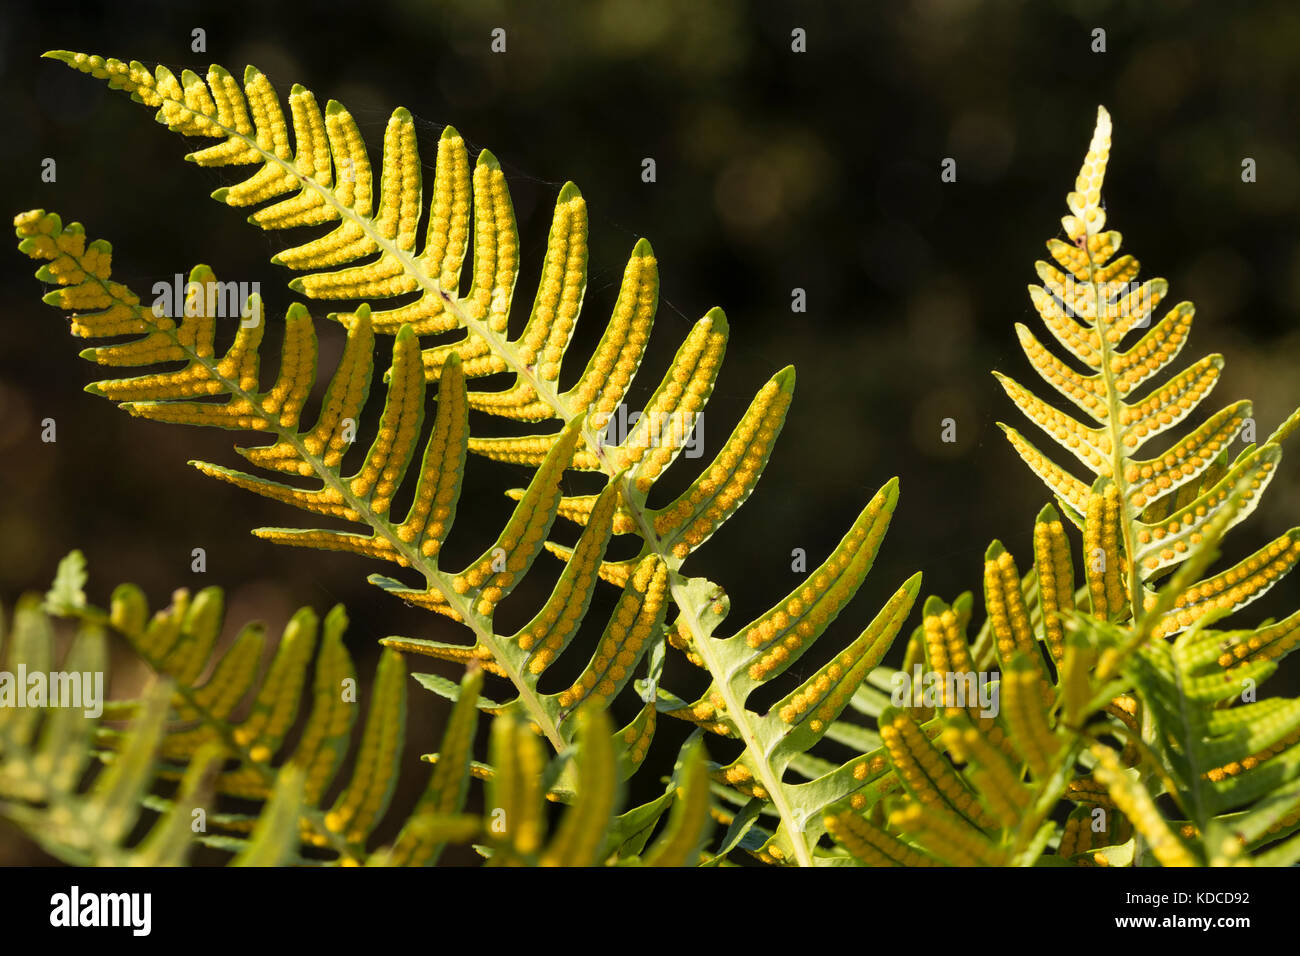 Underside of mature fronds of the Southern polypody fern, Polypodium cambricum, showing the yellow sori and spores Stock Photo